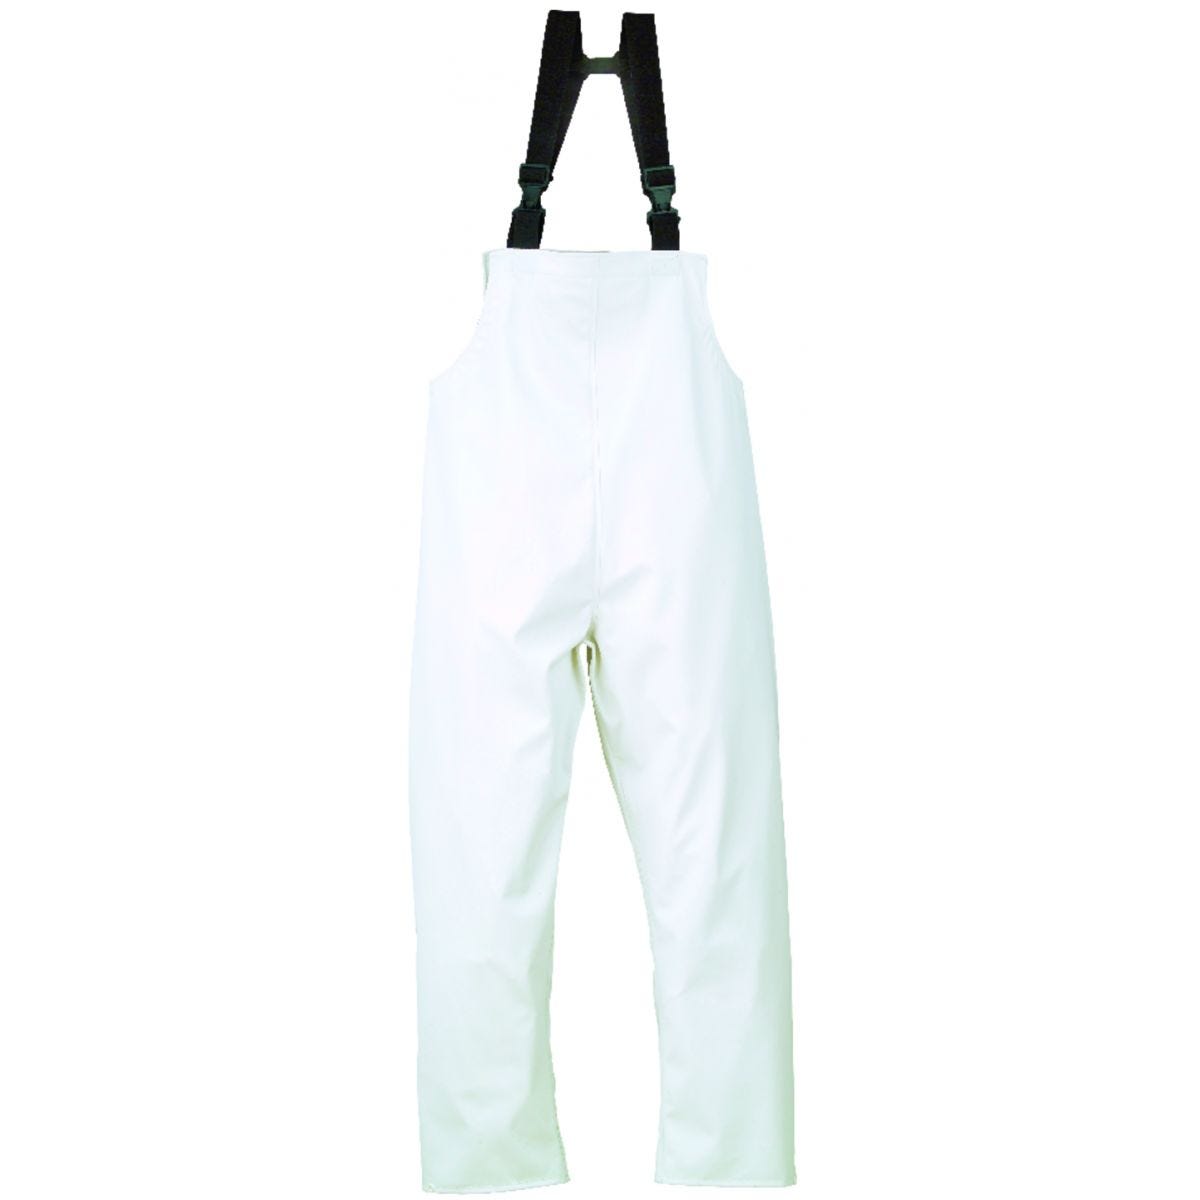 FOOD Cotte PU Blanc - COVERGUARD - Taille L 0